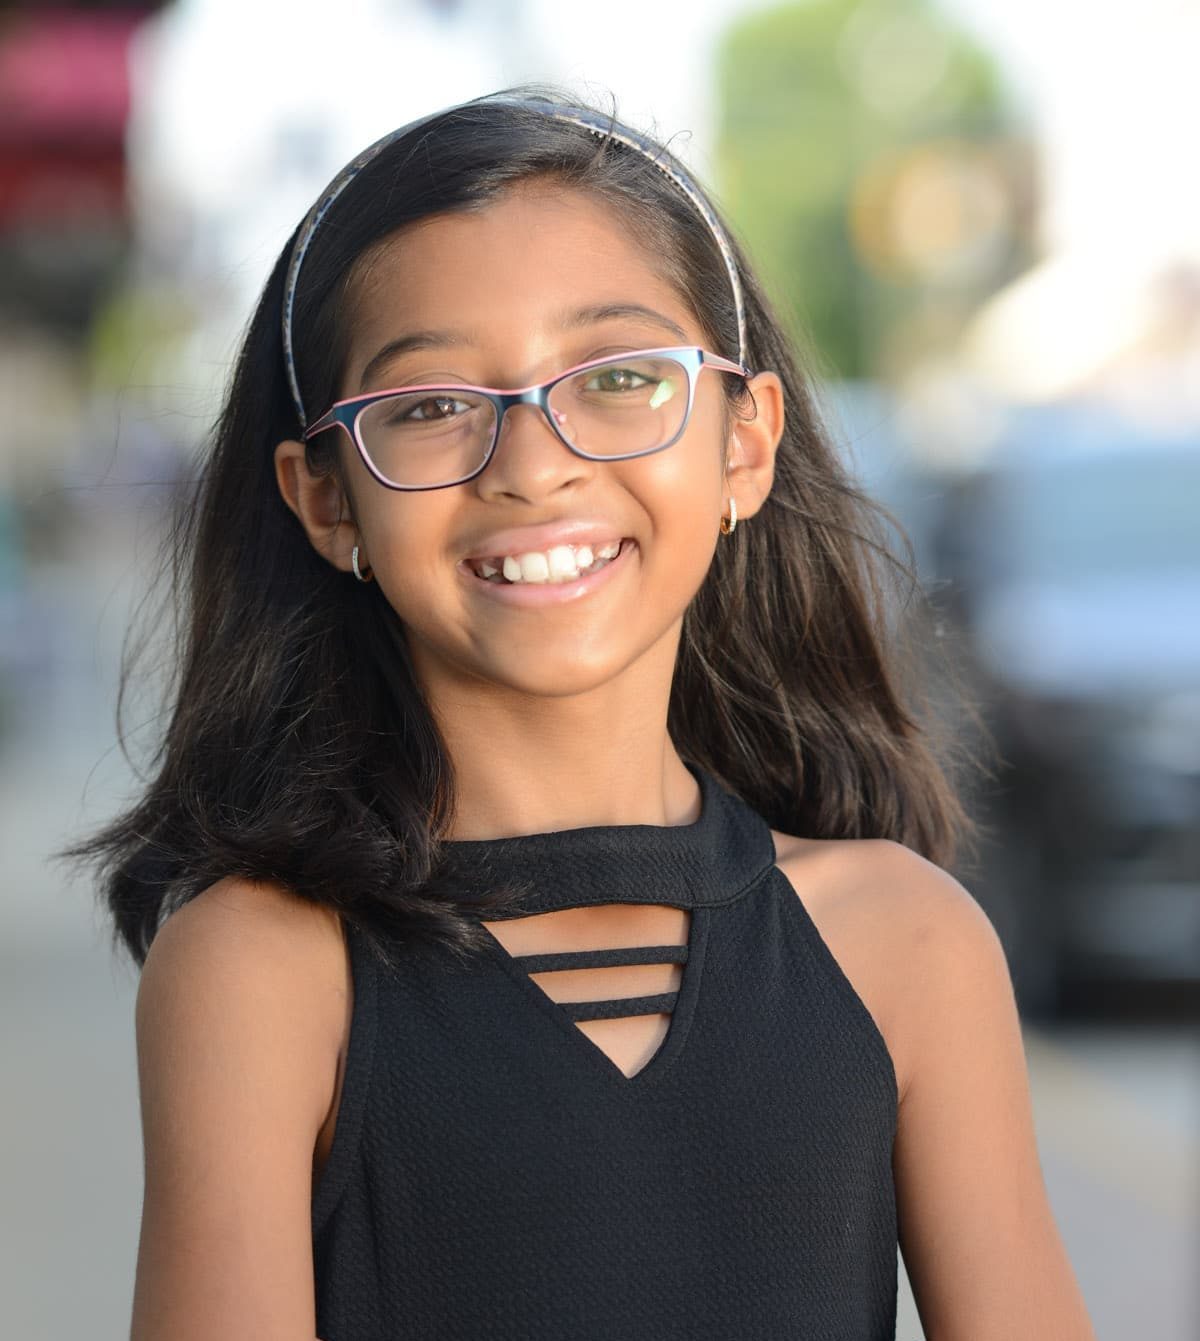 A young smiling girl with dark down hair, glasses and a black blouse.